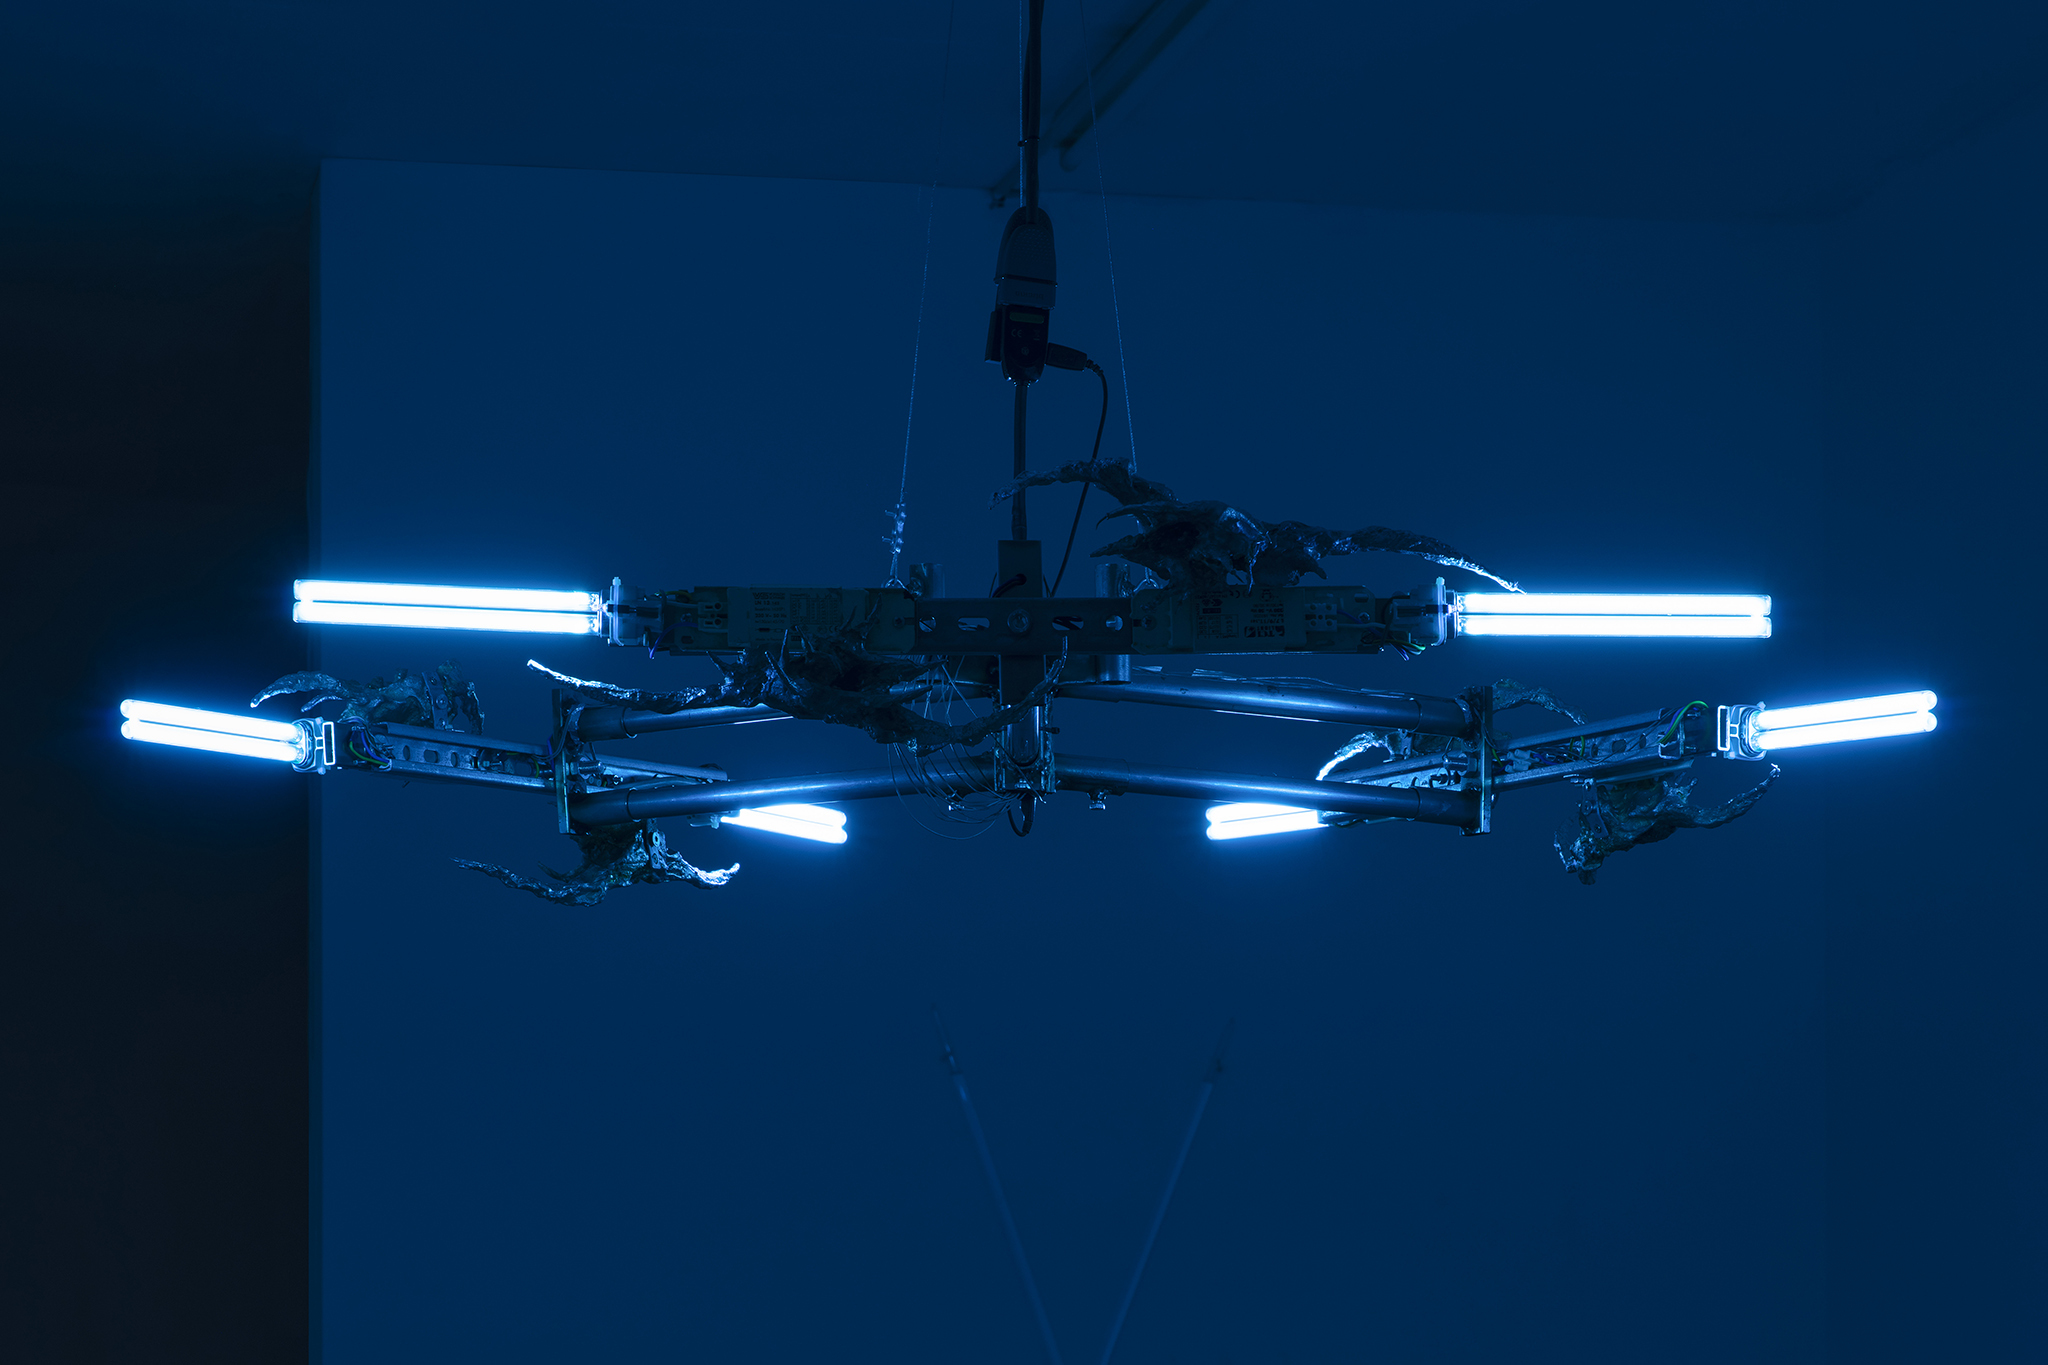 Night vision of Lorenzo Lunghi, Ultraviolette, 2022.  UVC-lamp 11W, Electronic ballast for TUV 11W, Arduino MKR, led diodes, tin, steel, galvanized iron, 60x80x5cm. Courtesy of the Artist and La Rada. Photography by Tiziano Ercoli & Riccardo Giancola